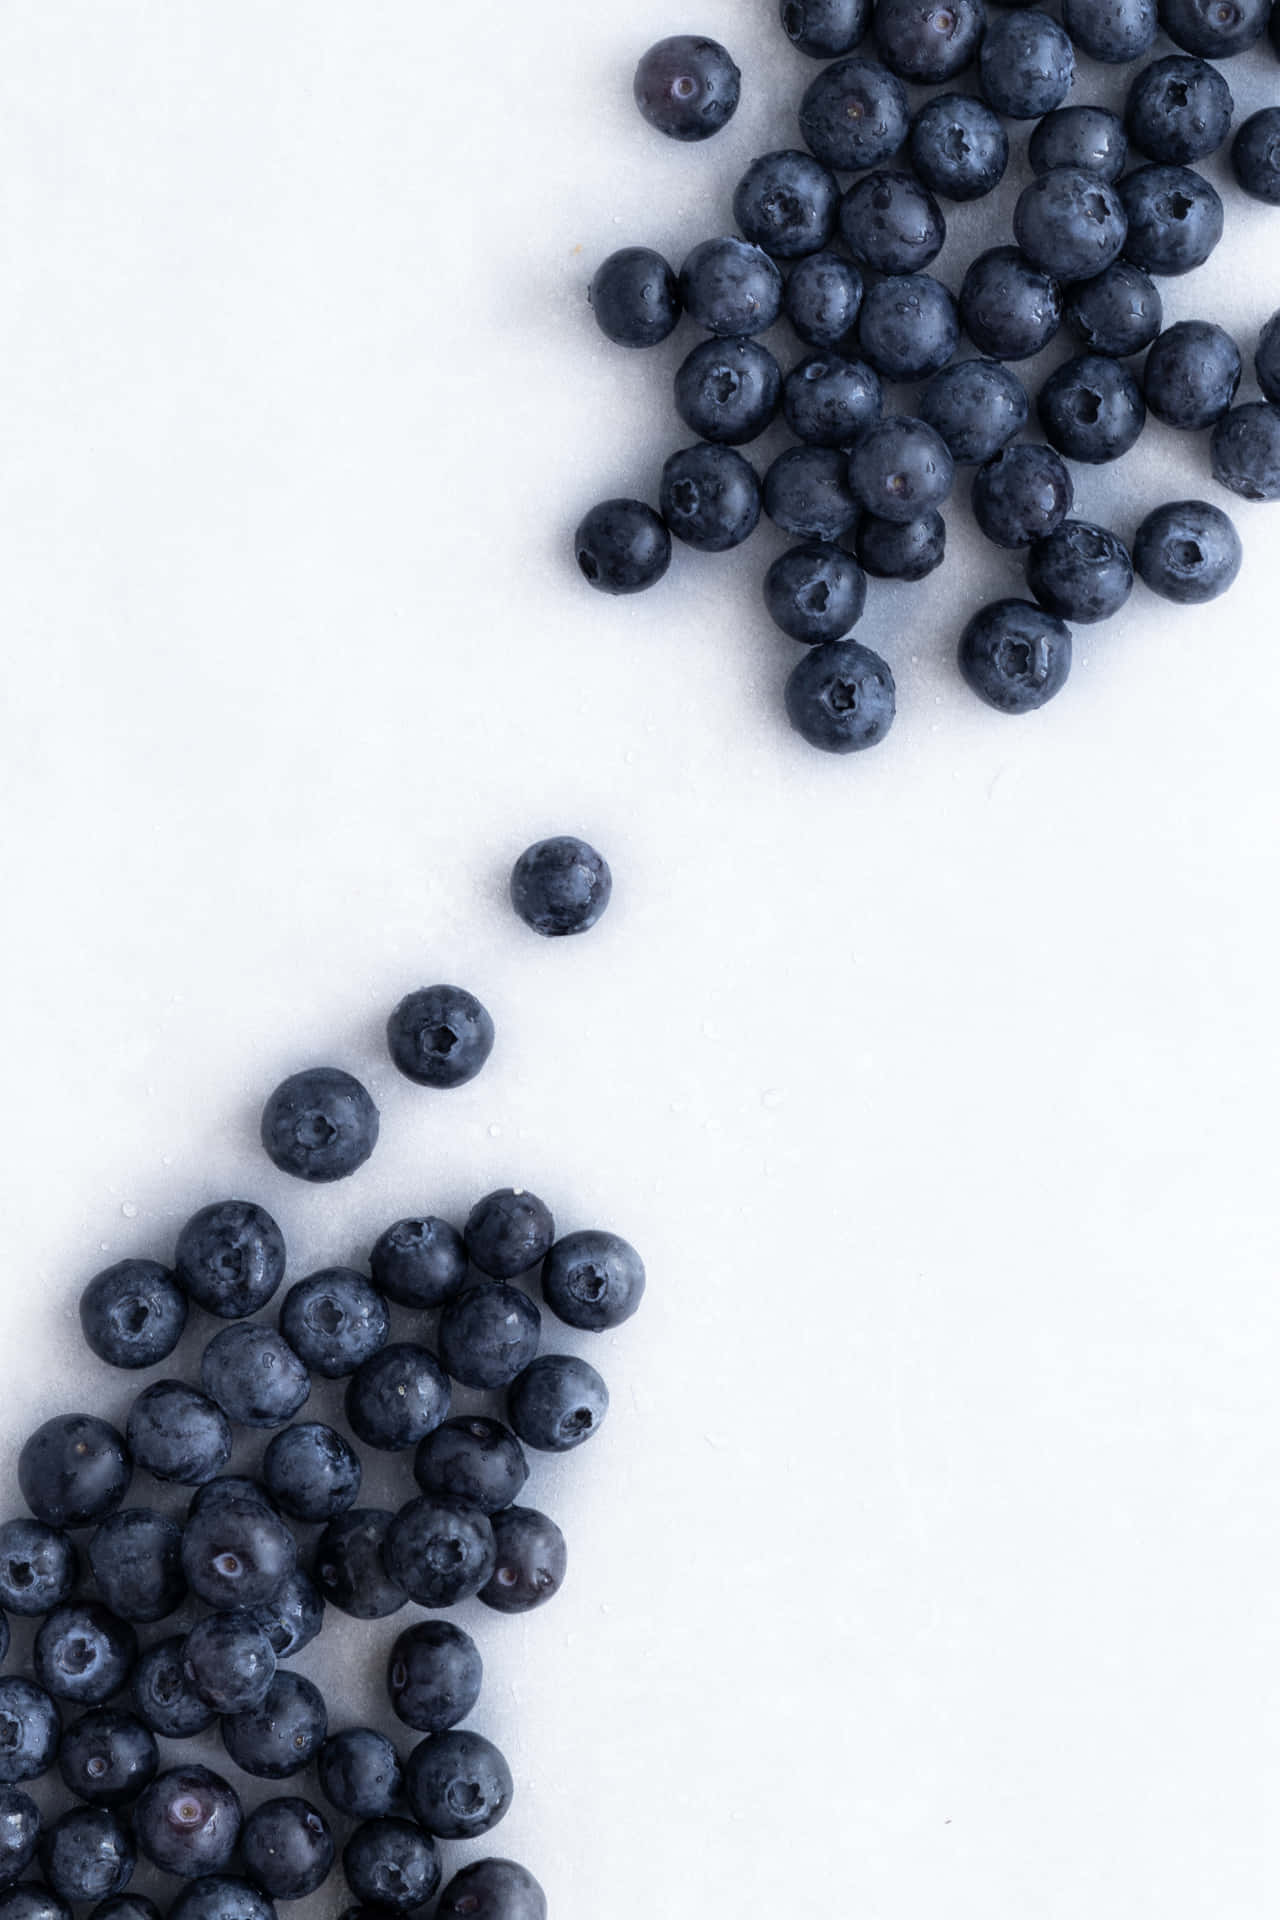 Capturing The Essence Of Blueberries